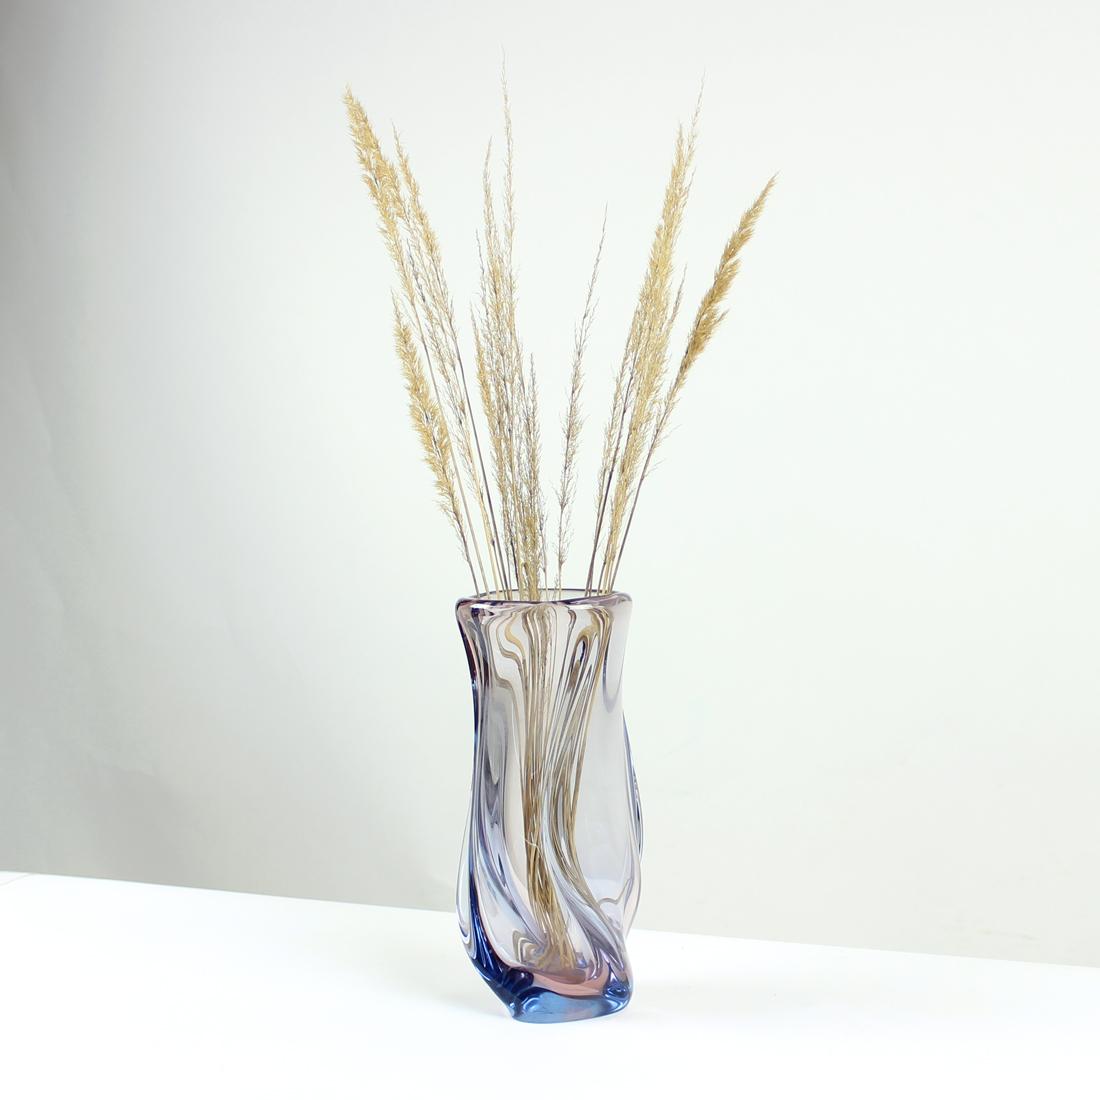 Big and heavy vase made of an art murano glass. Produced in Czechoslovakia in 1960s by Josef Hospodka and Skrdlovice Glass Factory. The vase is in transparent glass with slight blue shade. The shape is super elegant as it twists slightly. The glass